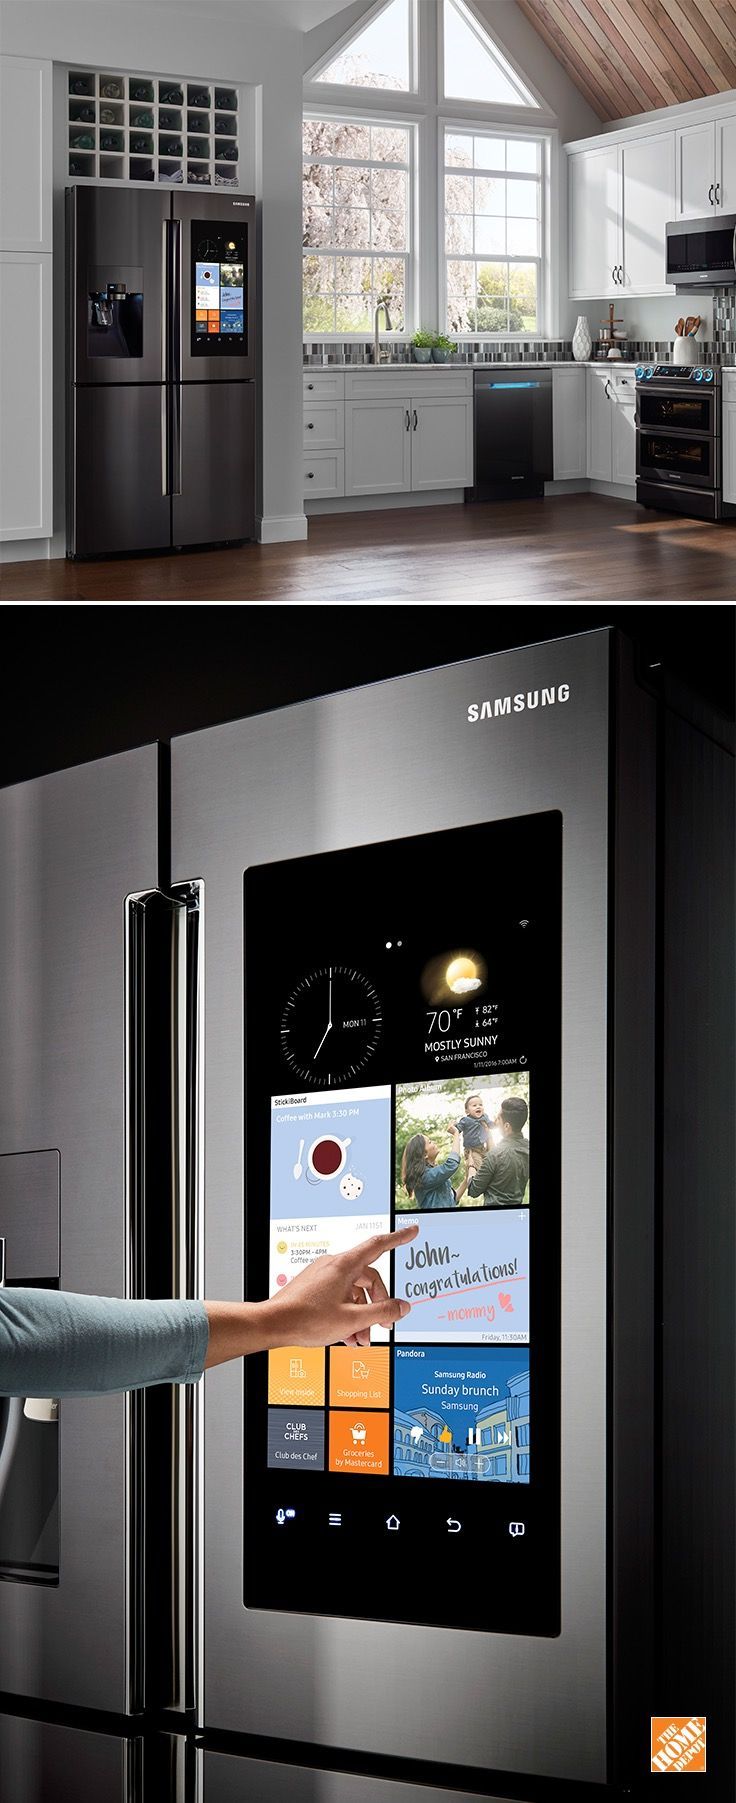 Make the kitchen the center of your home. Samsung’s Family Hub™ Refrigerator helps you manage your hom